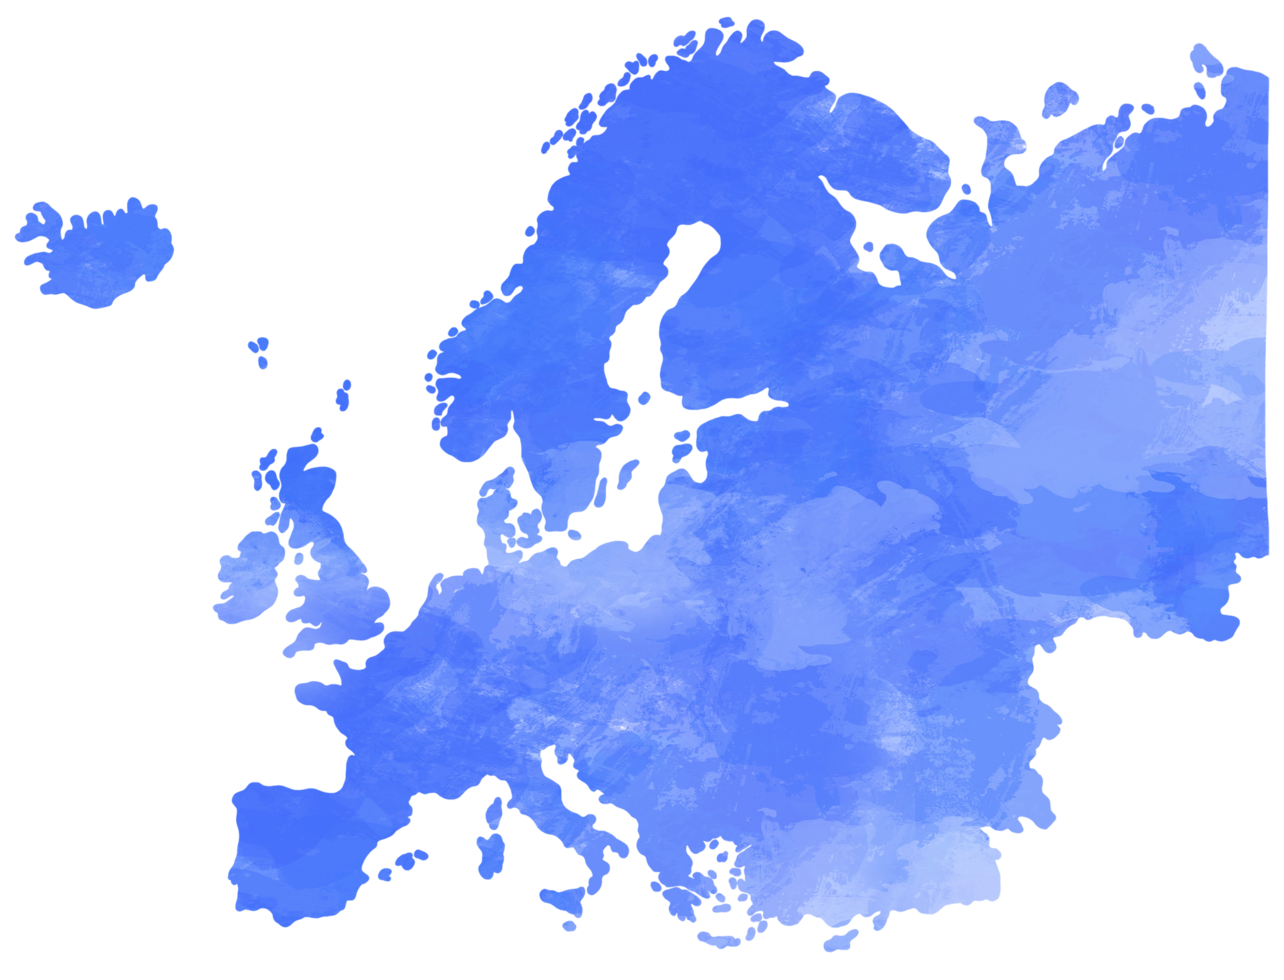 doodle freehand drawing of europe map. png